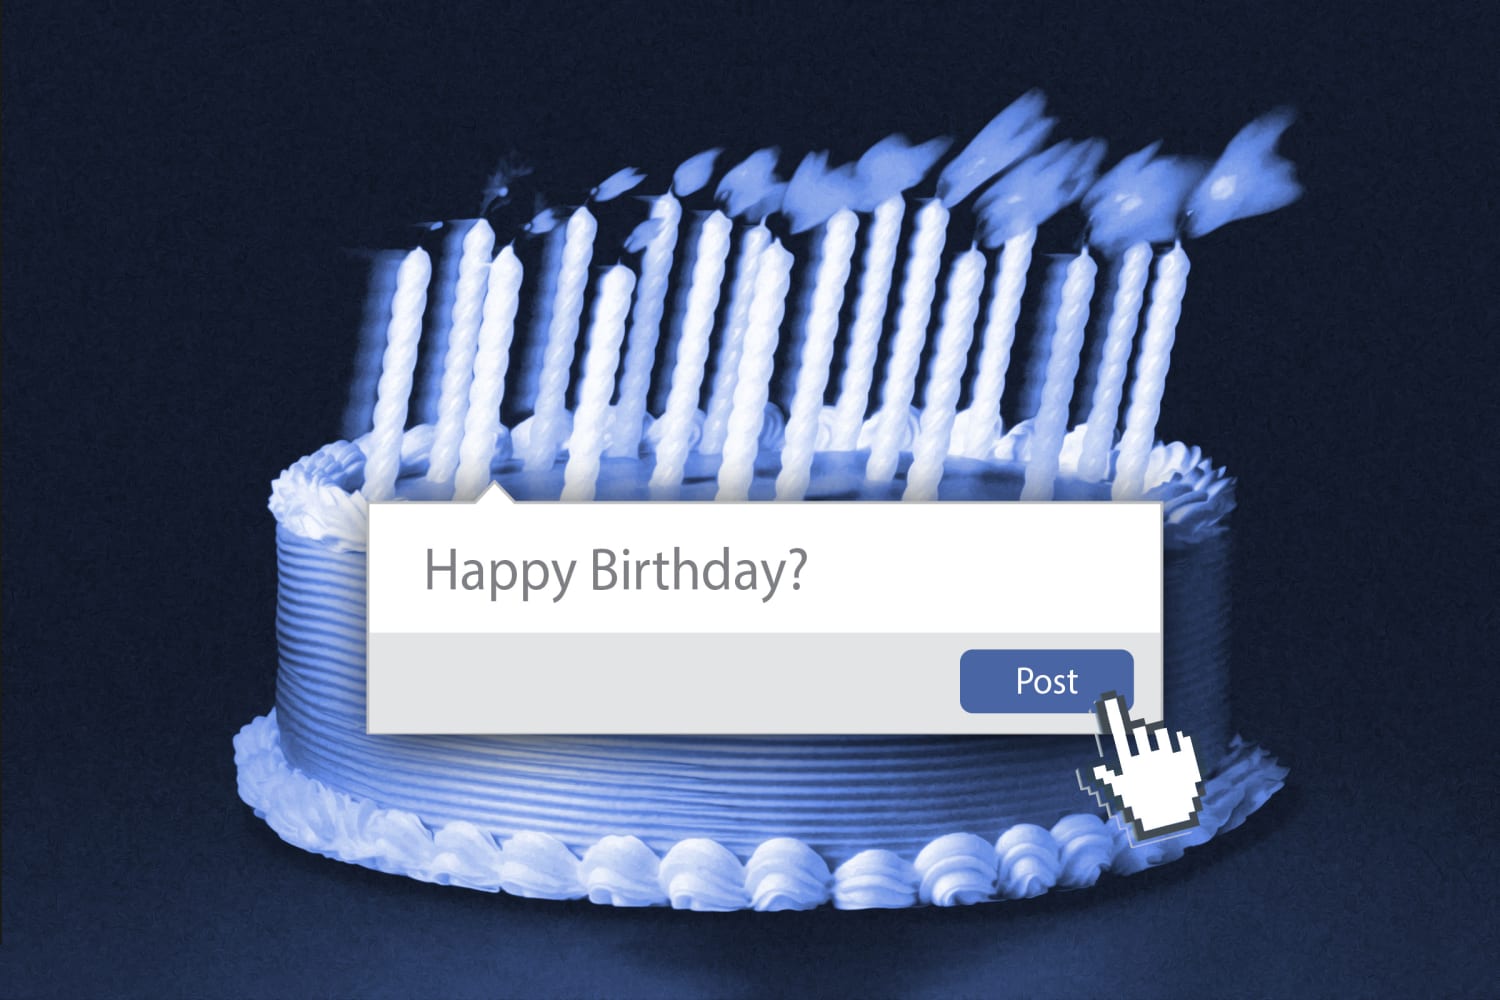 Facebook just turned 20, but don’t expect a party